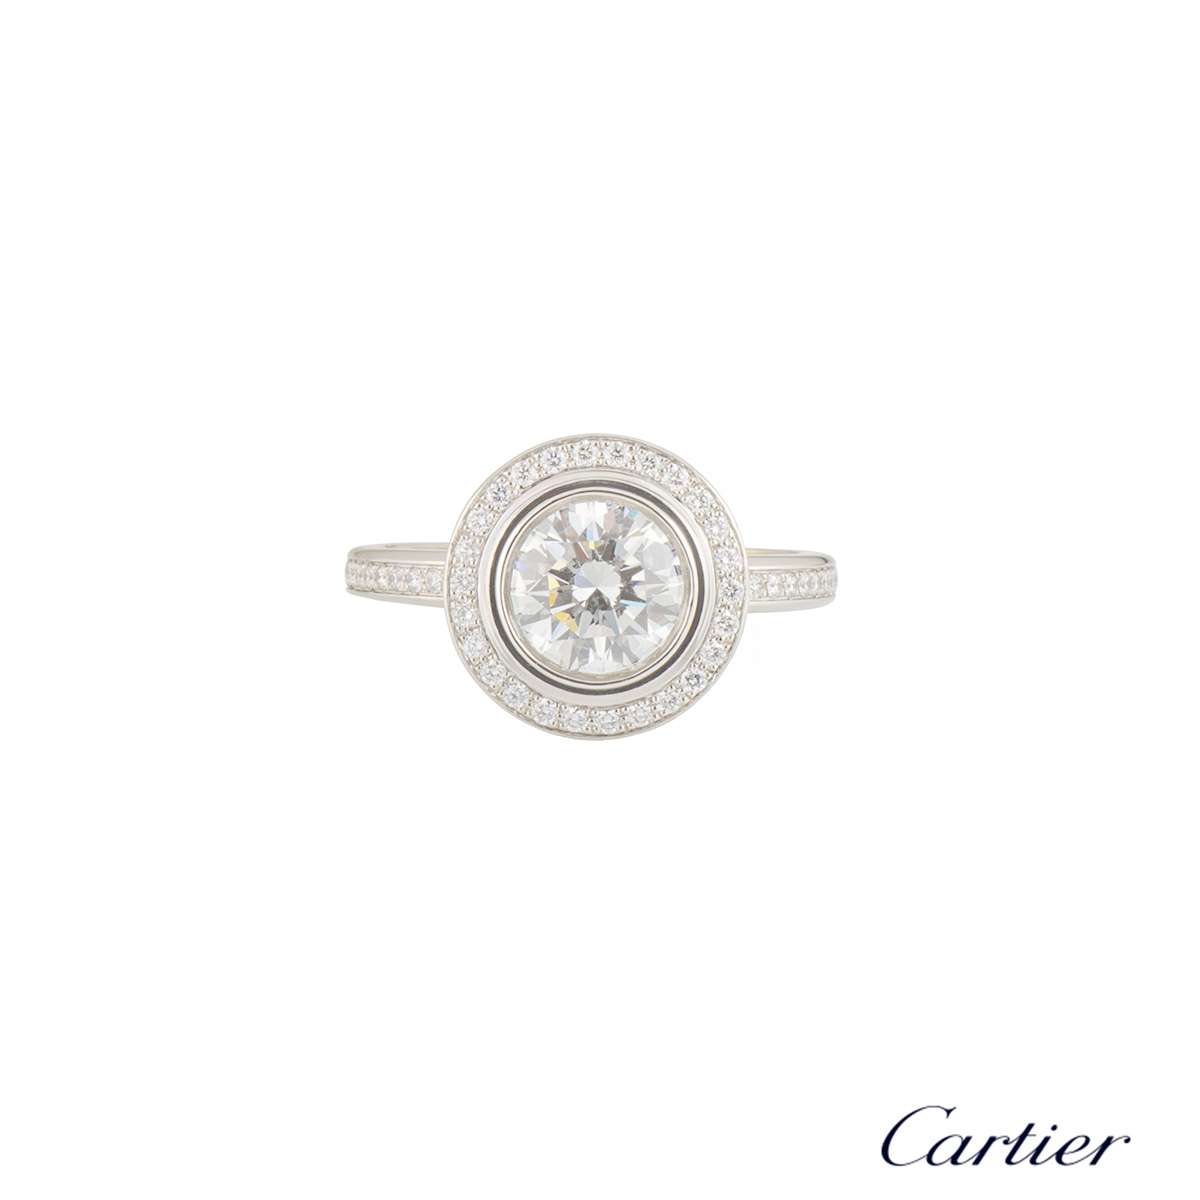 cartier d'amour engagement ring price